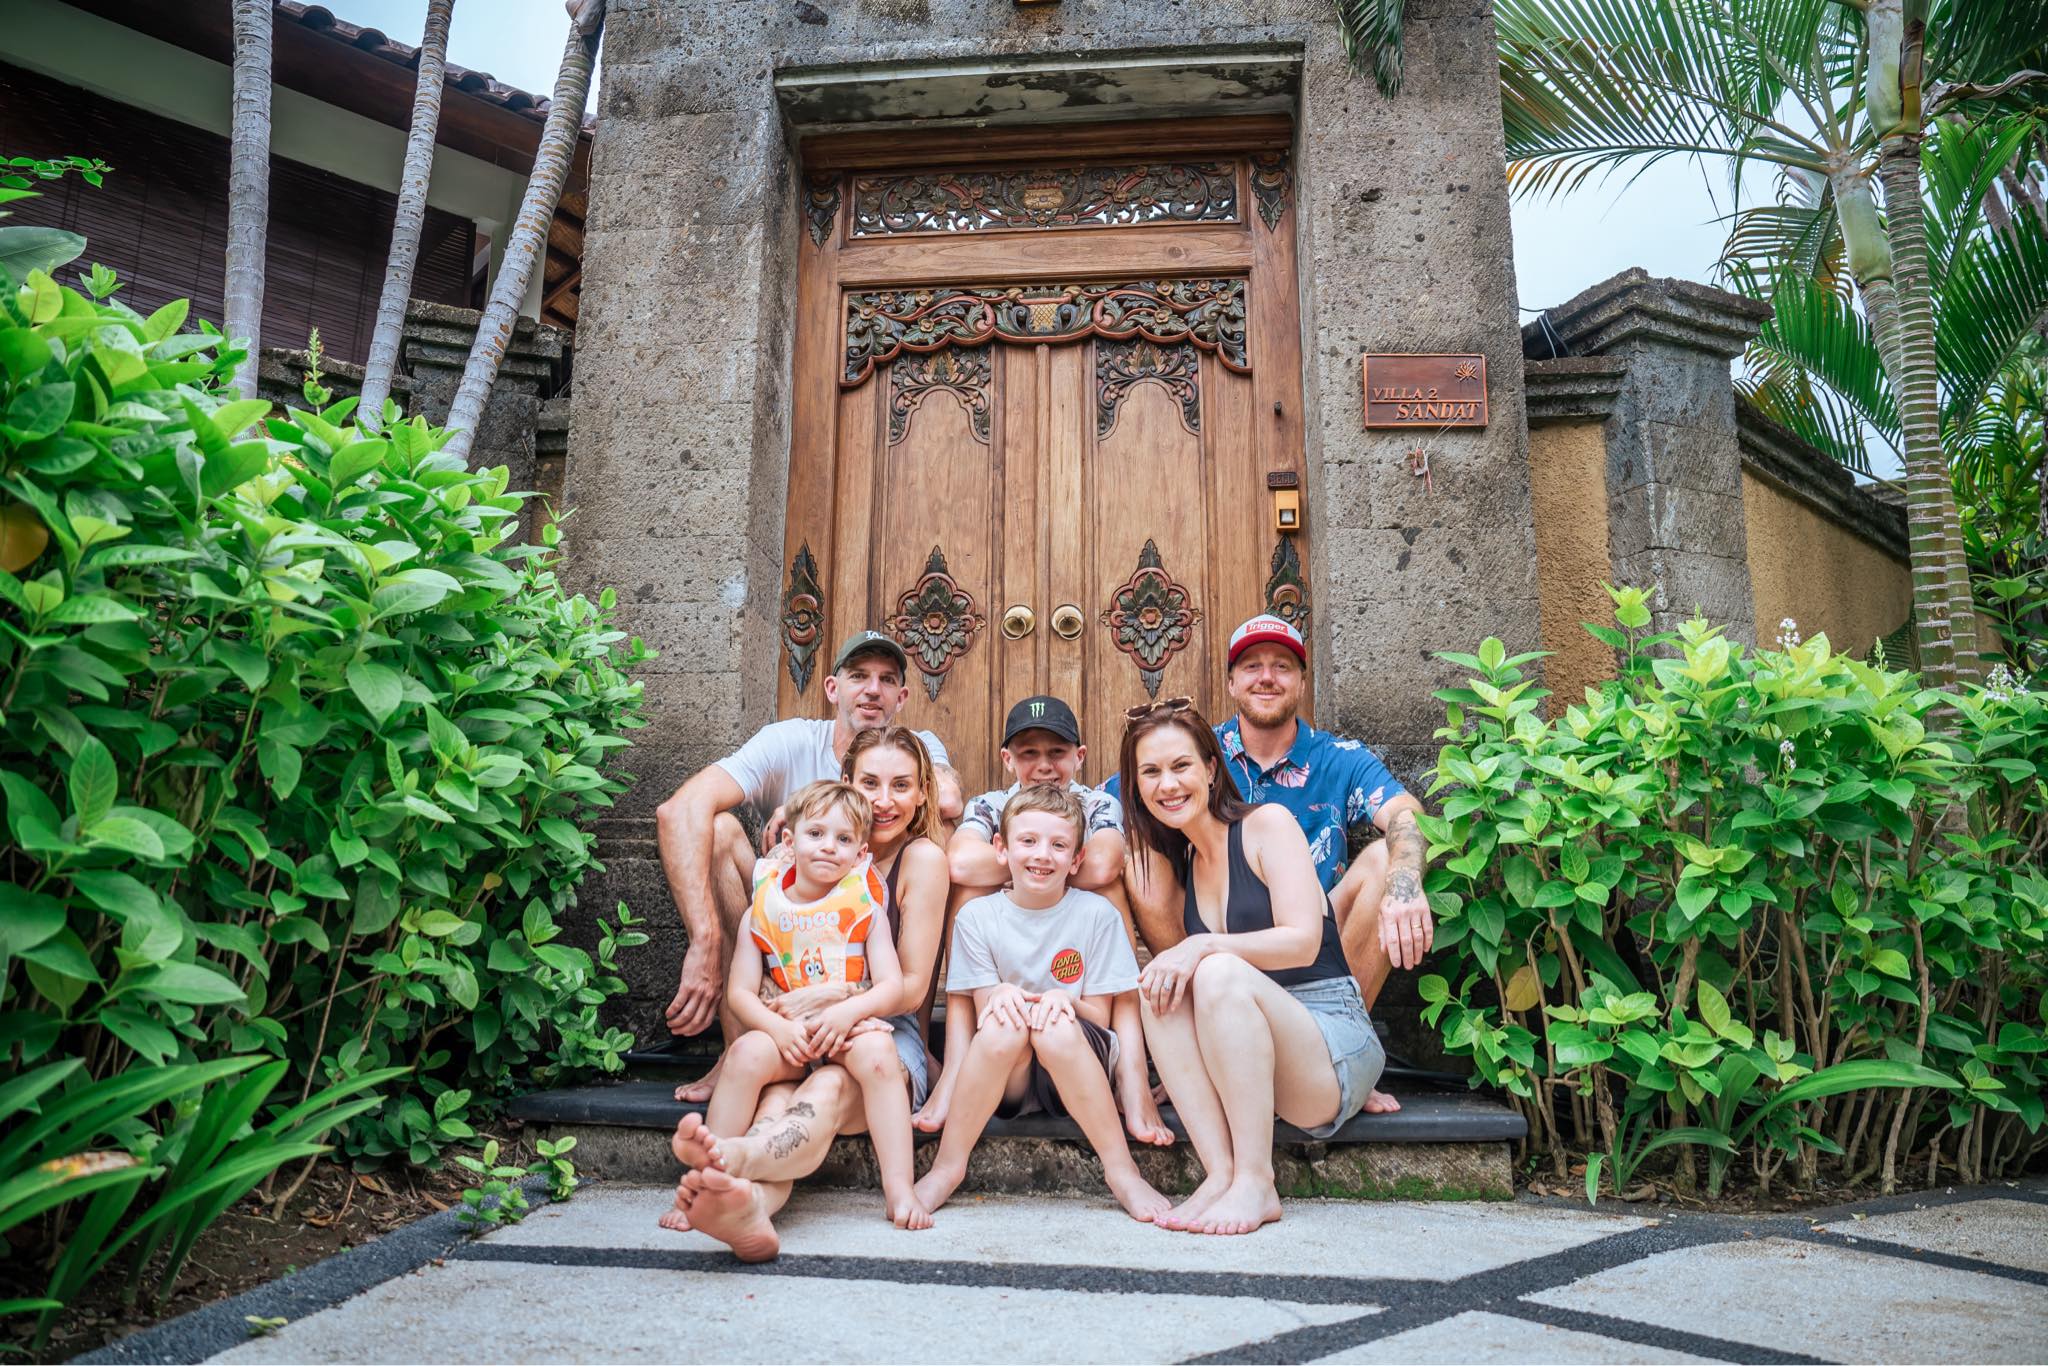 Family Friendly Bali: Where to Stay - Pros and Cons by Area!